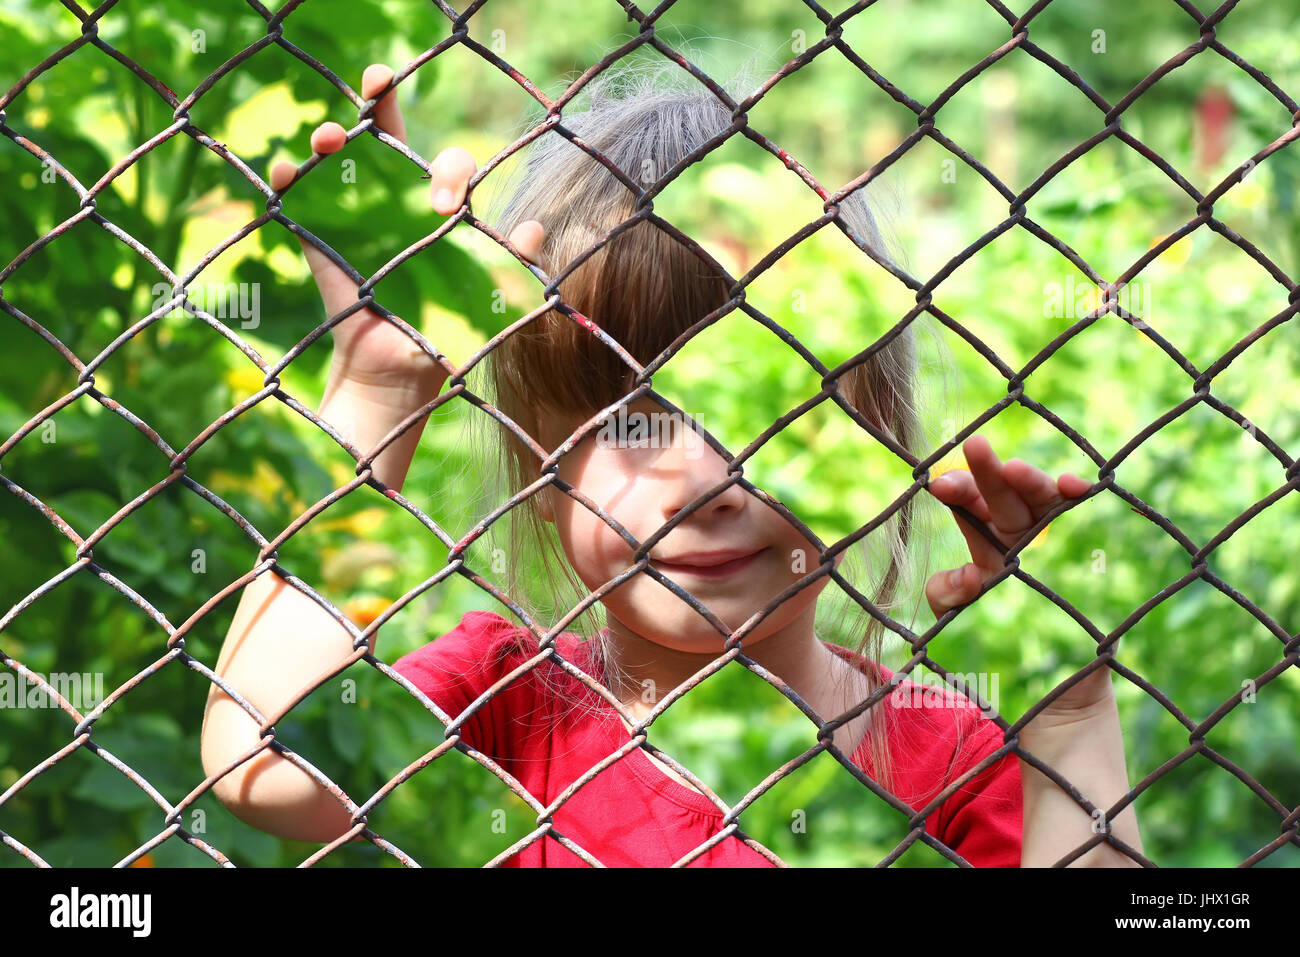 Abstract picture of a little girl behind chain link fence. Photo combination concept Stock Photo